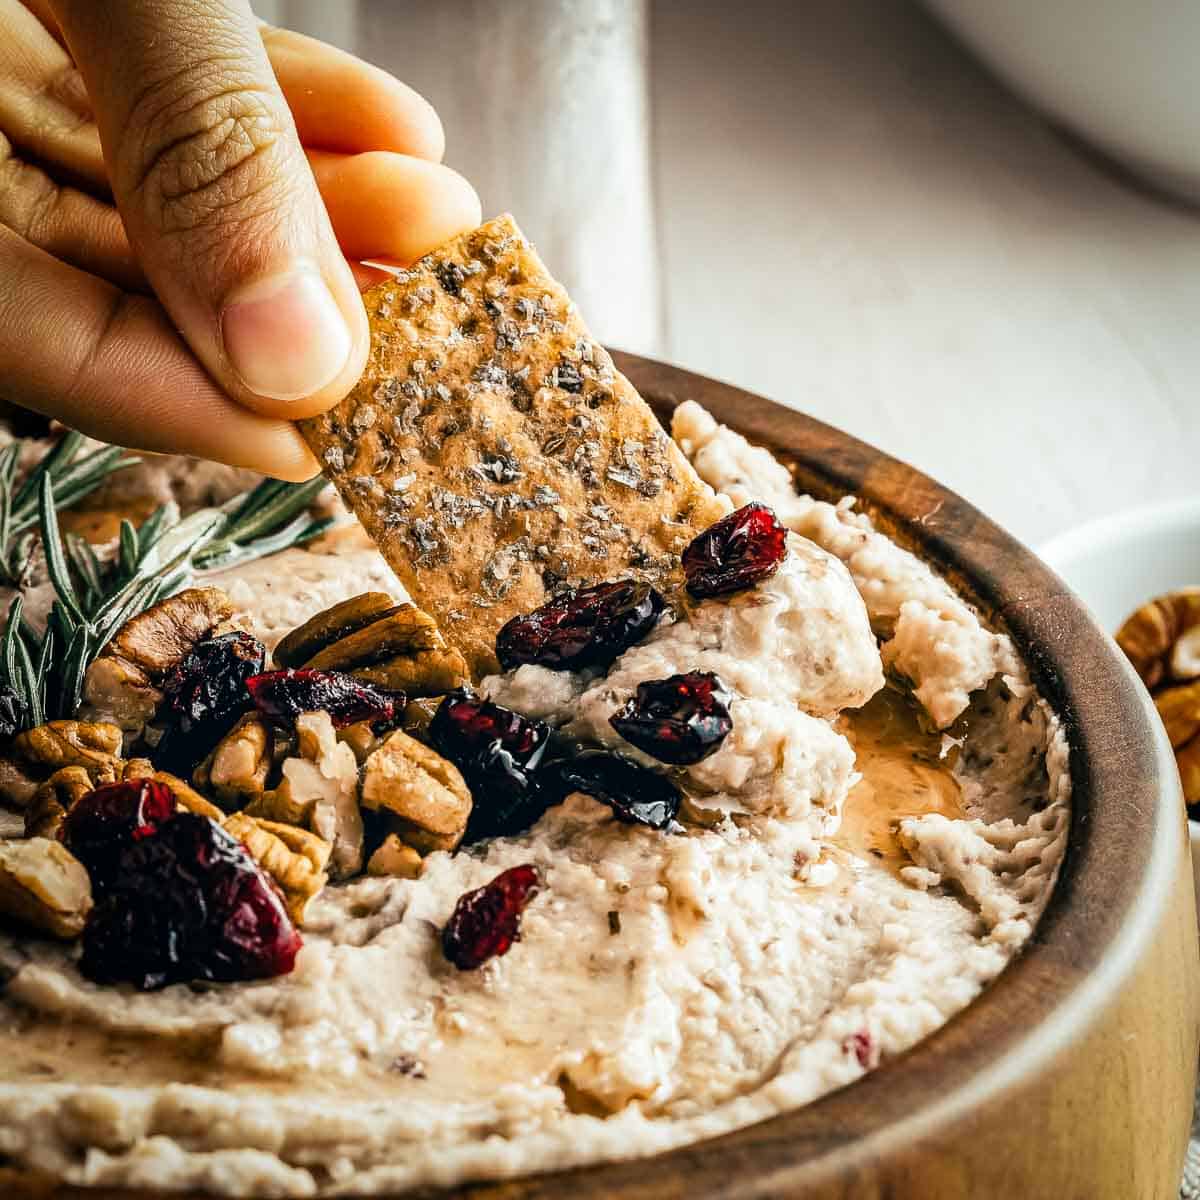 Side close up of a hand scooping some hummus with a cracker - the hummus is garnished with rosemary, cranberries, and pecans.